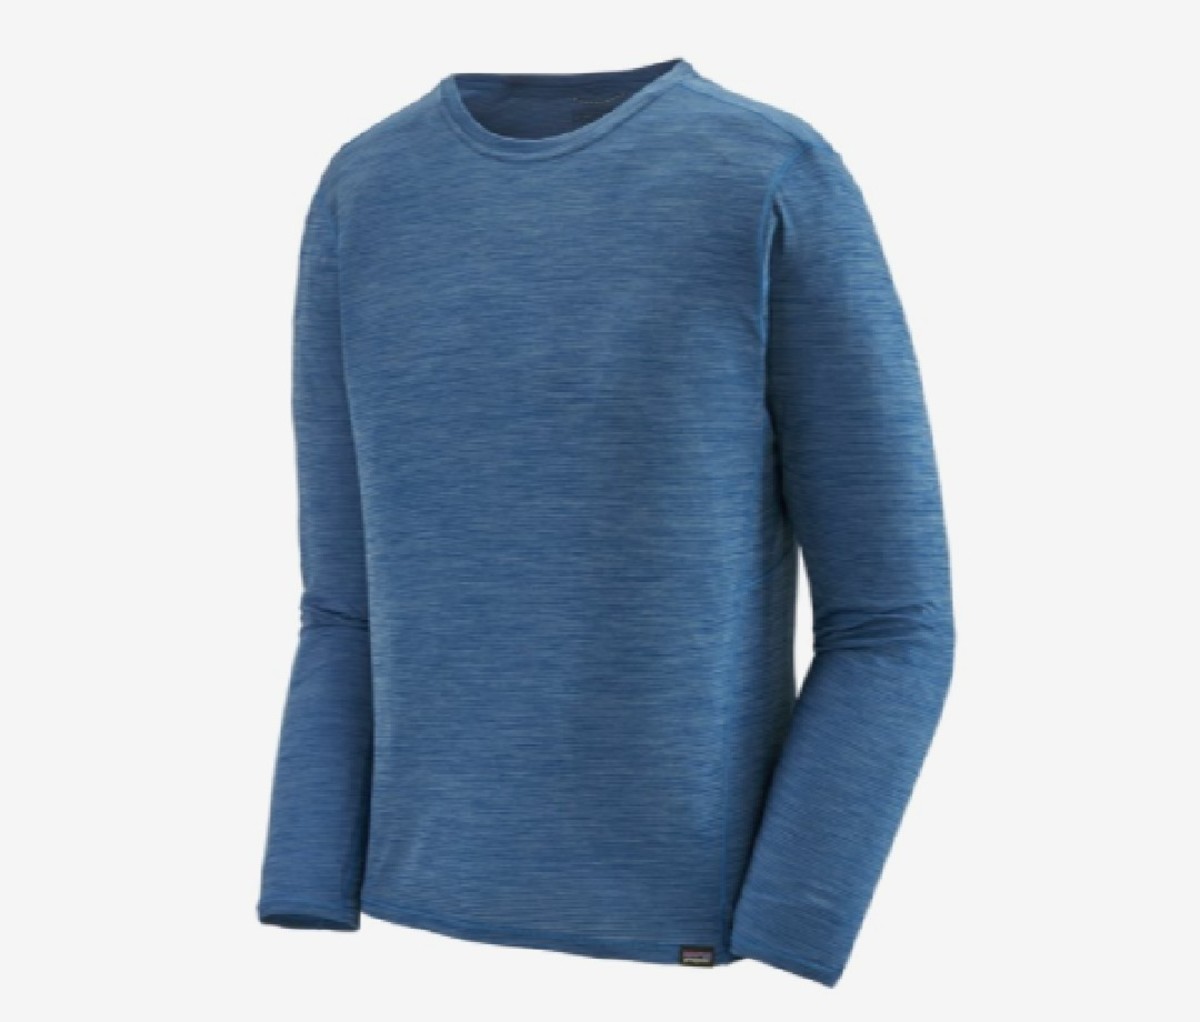 Blue long sleeve shirt from the Patagonia Capilene Cool Apparel collection